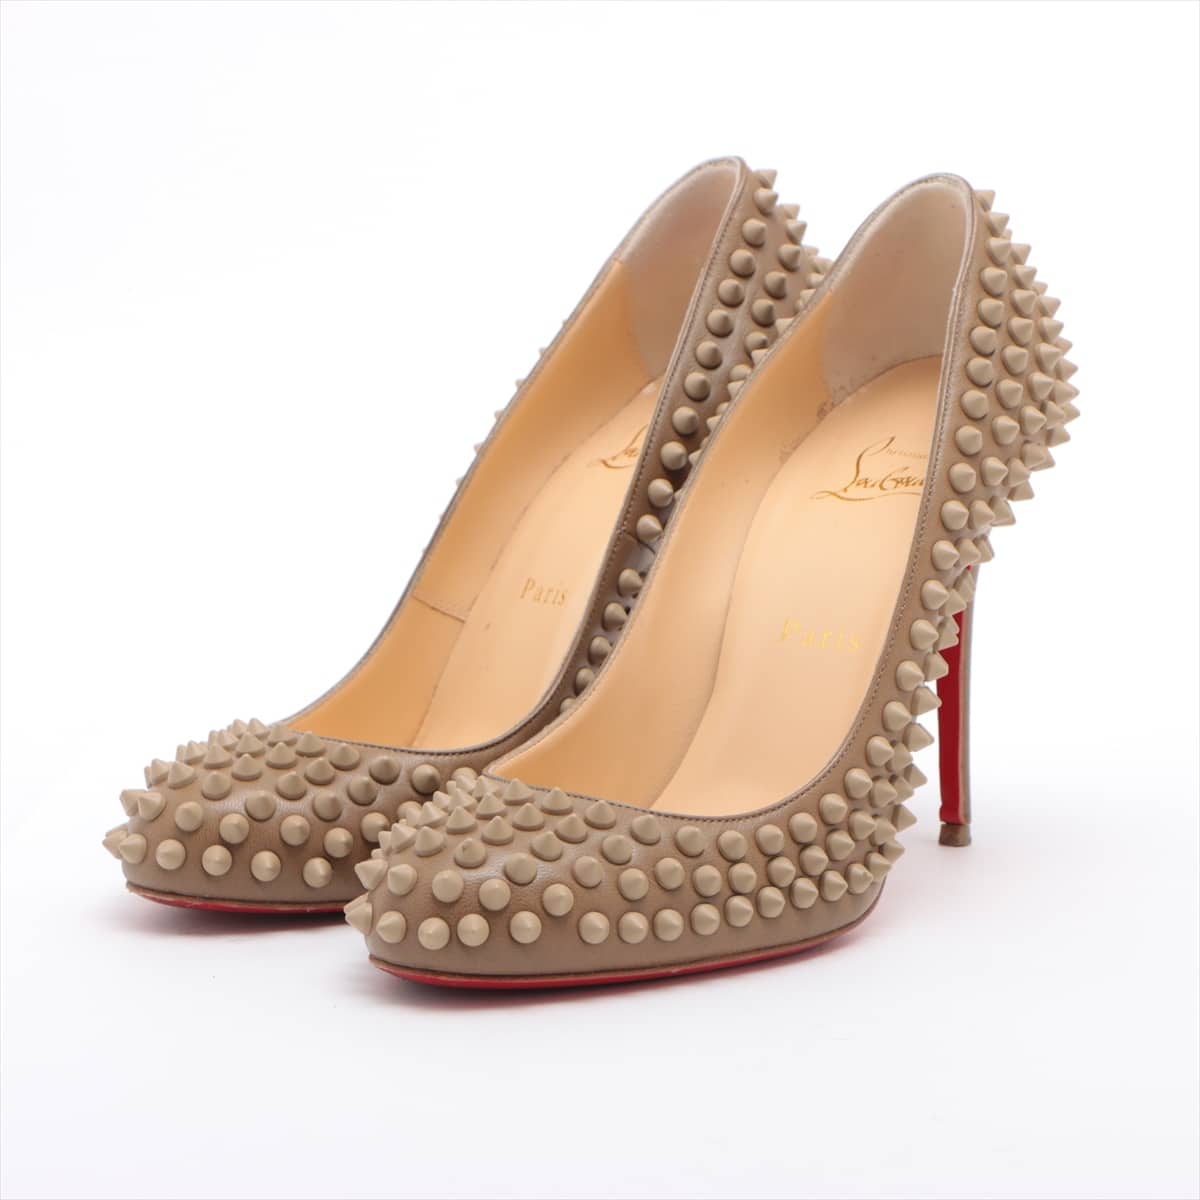 Christian Louboutin Spike Studs Leather Pumps 38 Ladies' Beige